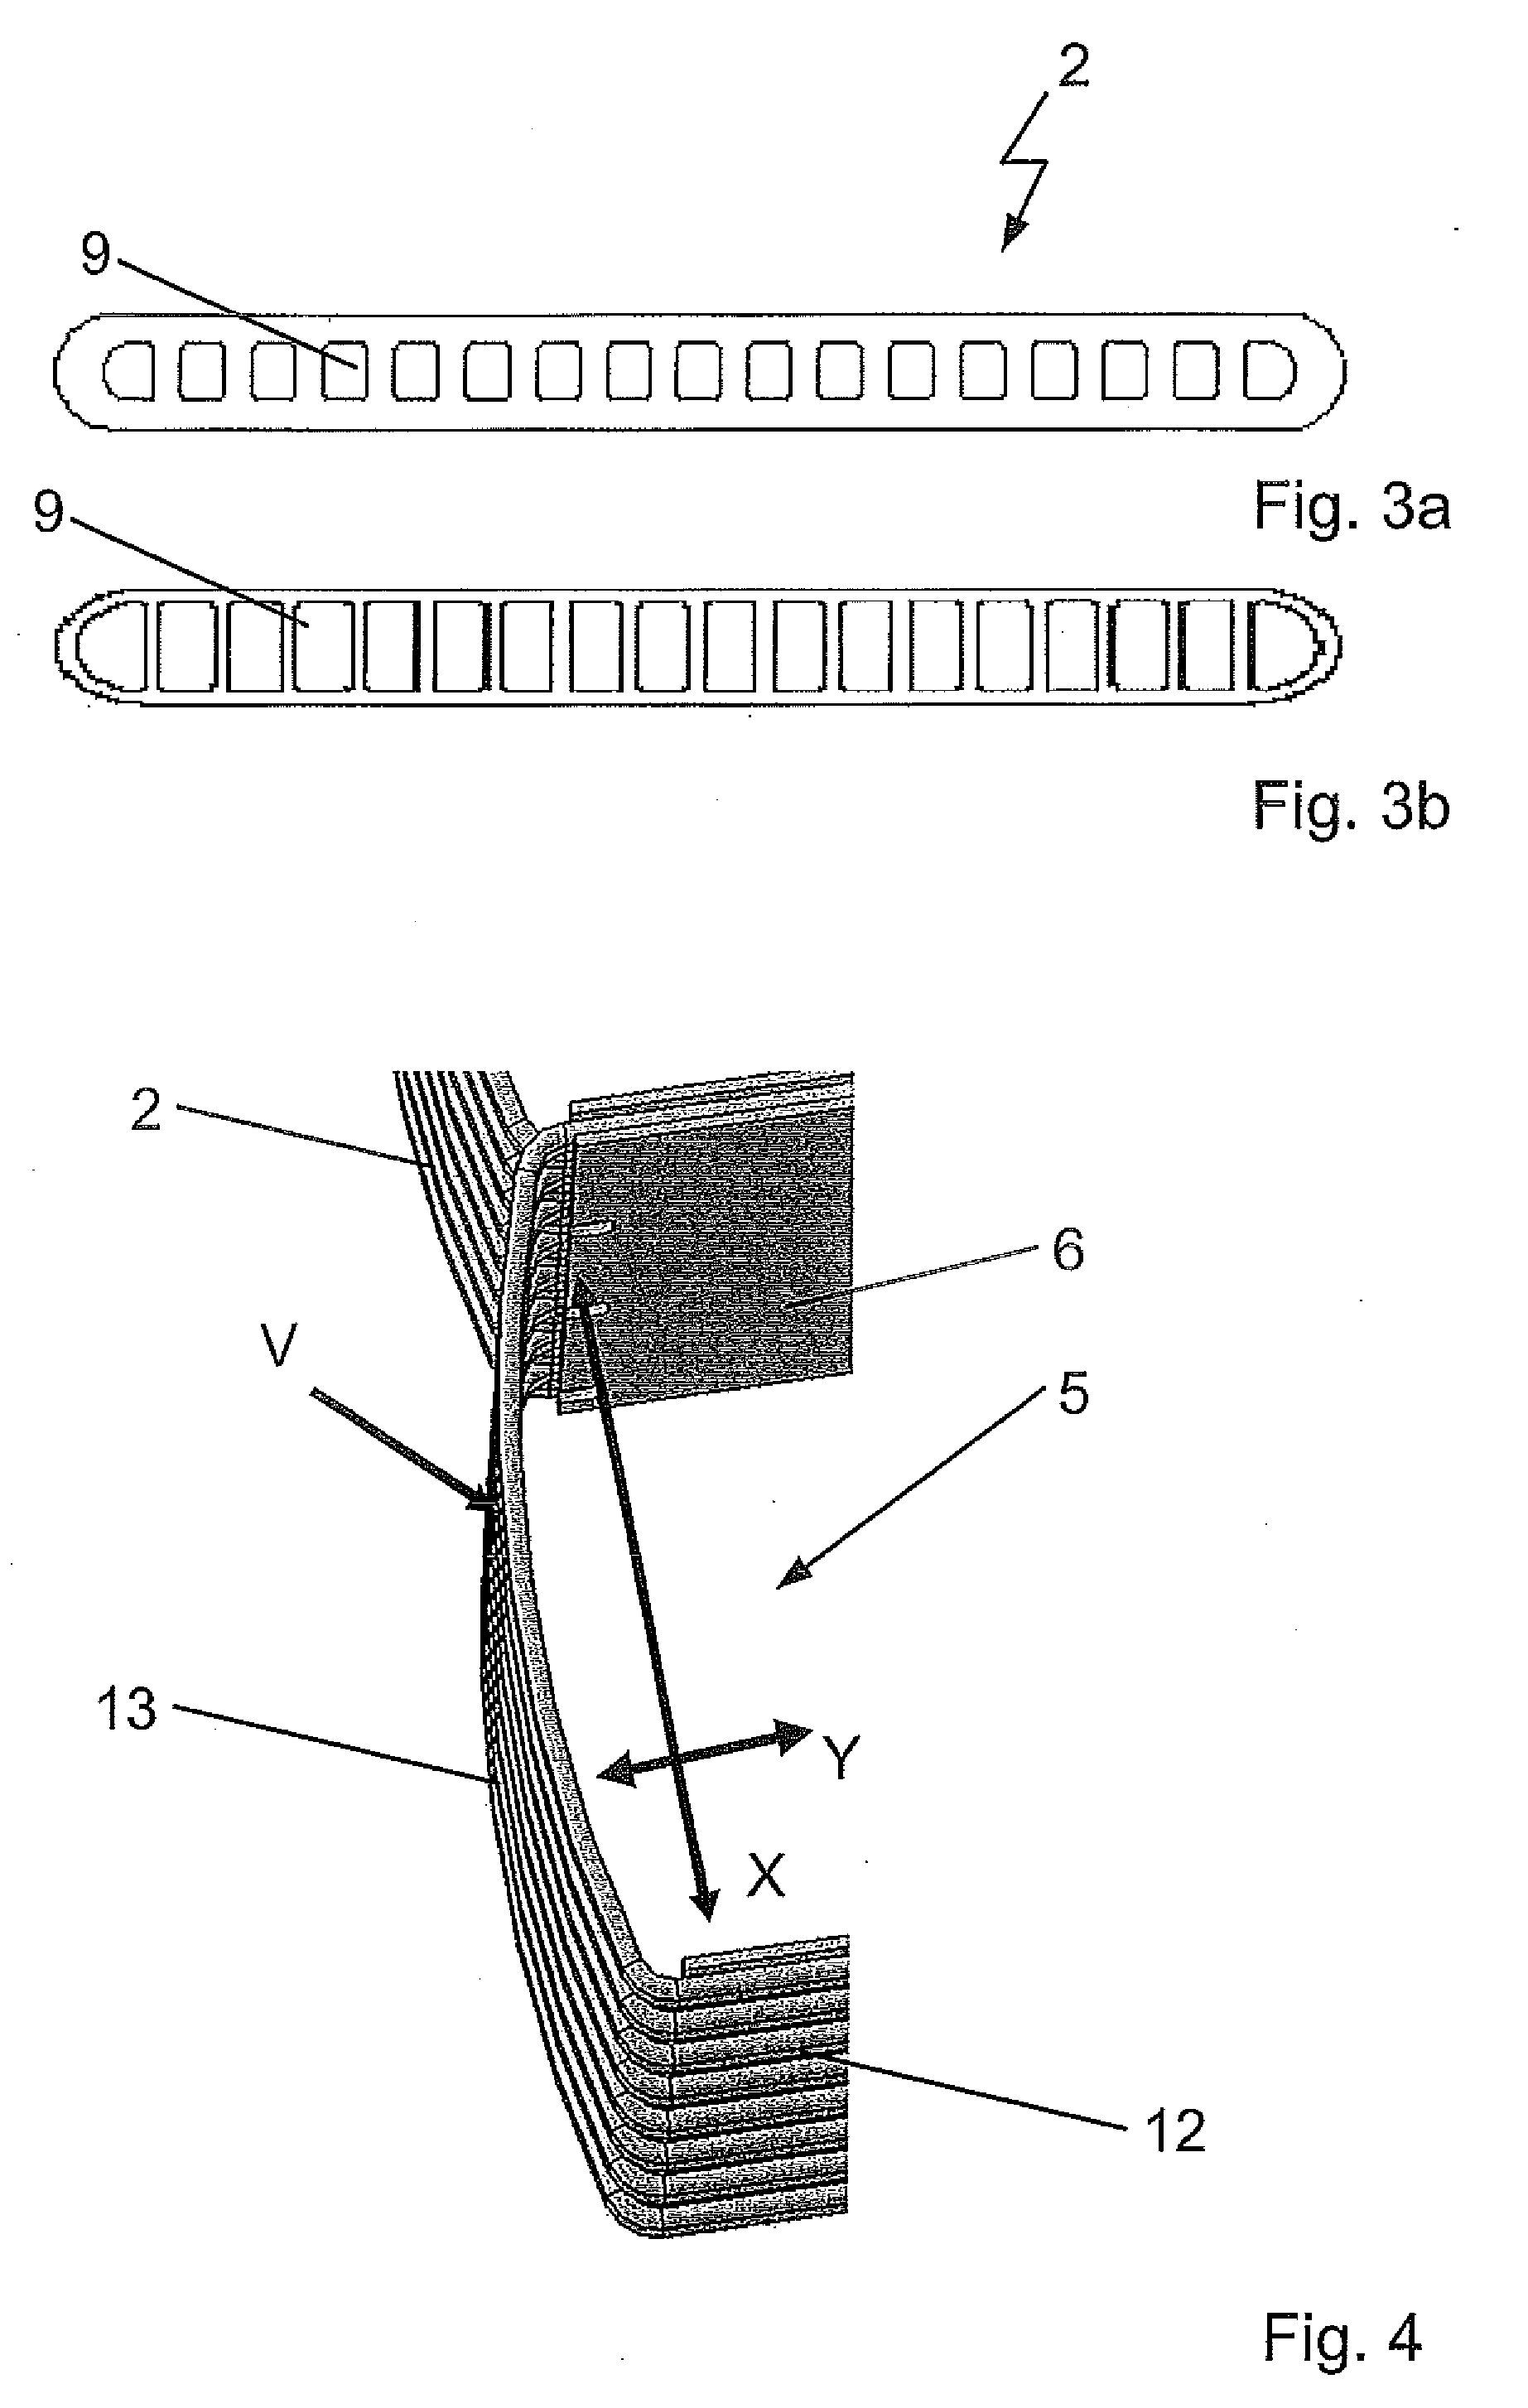 Heat exchanger for temperature control of vehicle batteries